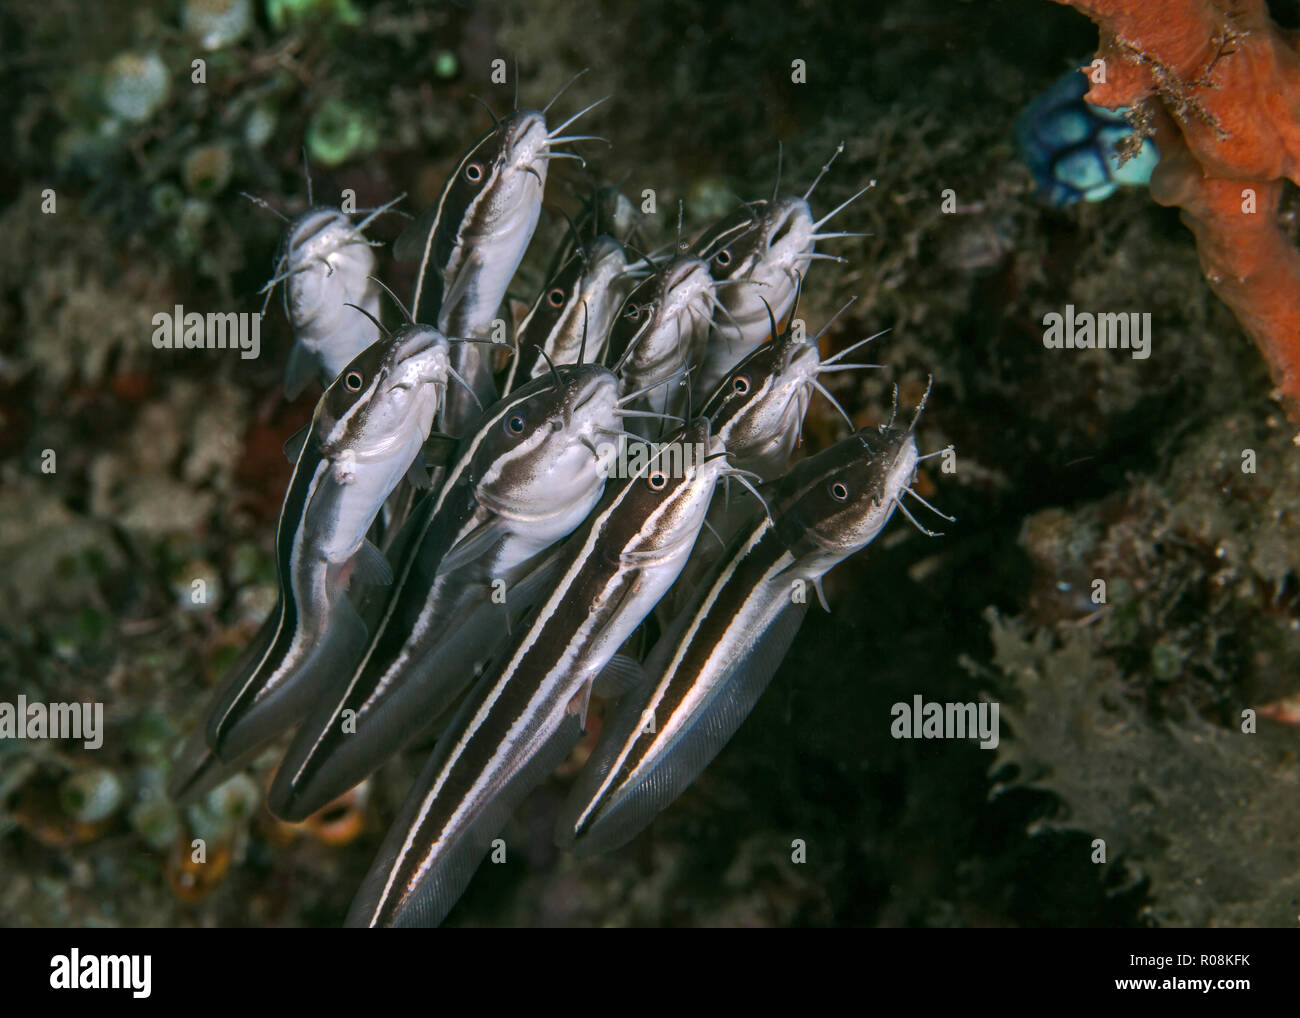 Tightly packed school of striped catfish (Plotosus lineatus) swimming along coral reef.  Ambon, Indonesia. Stock Photo